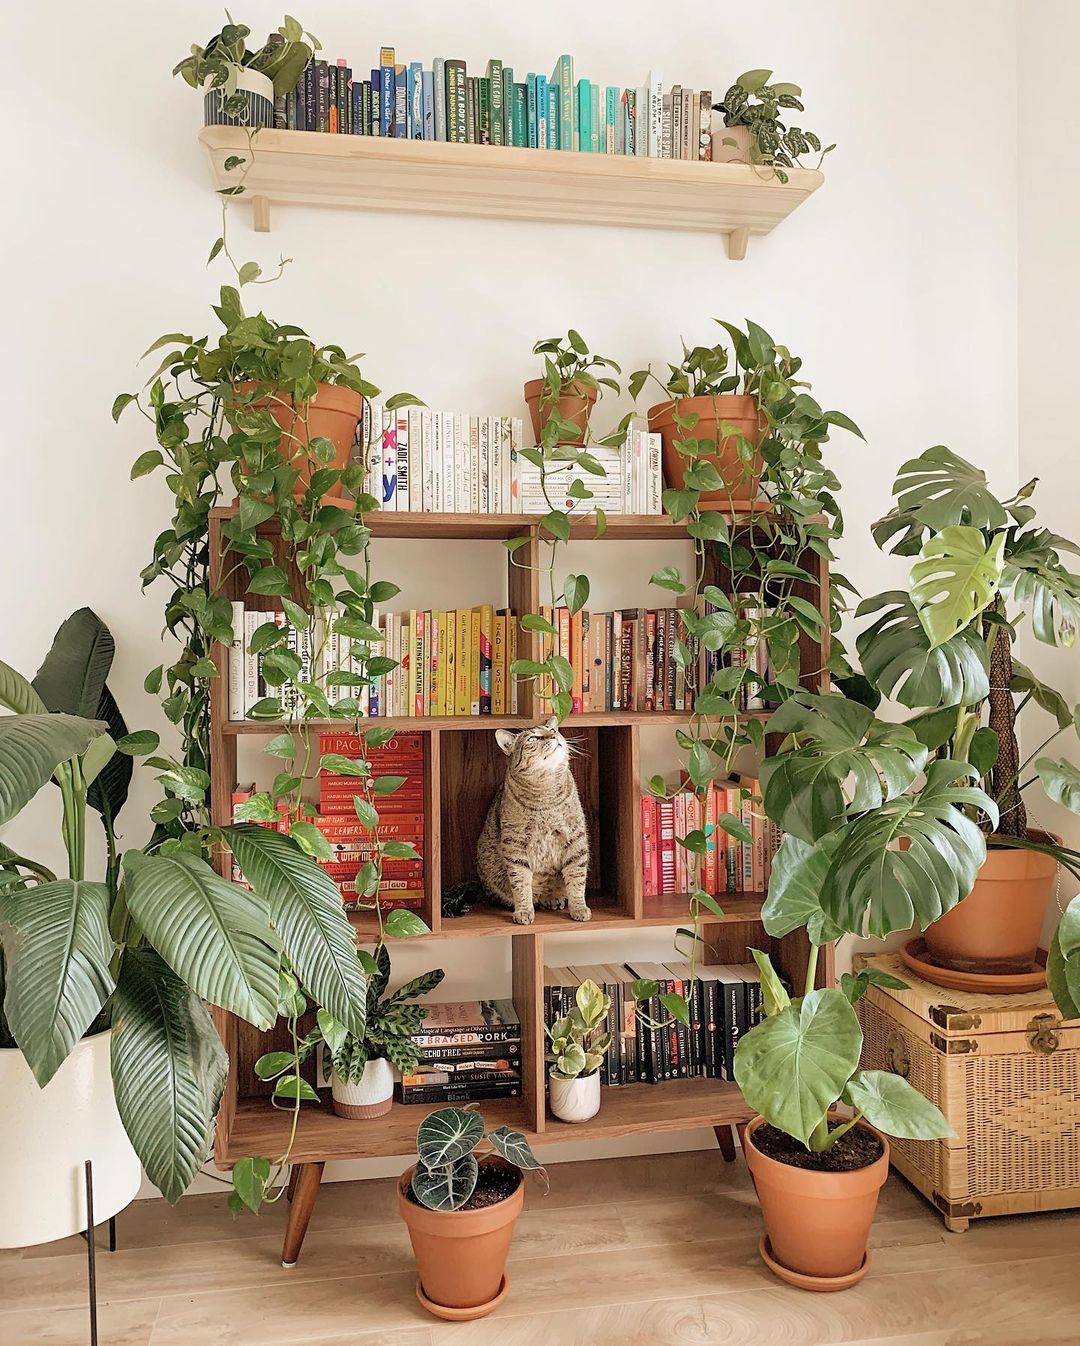 plants in pots and cat on bookshelf